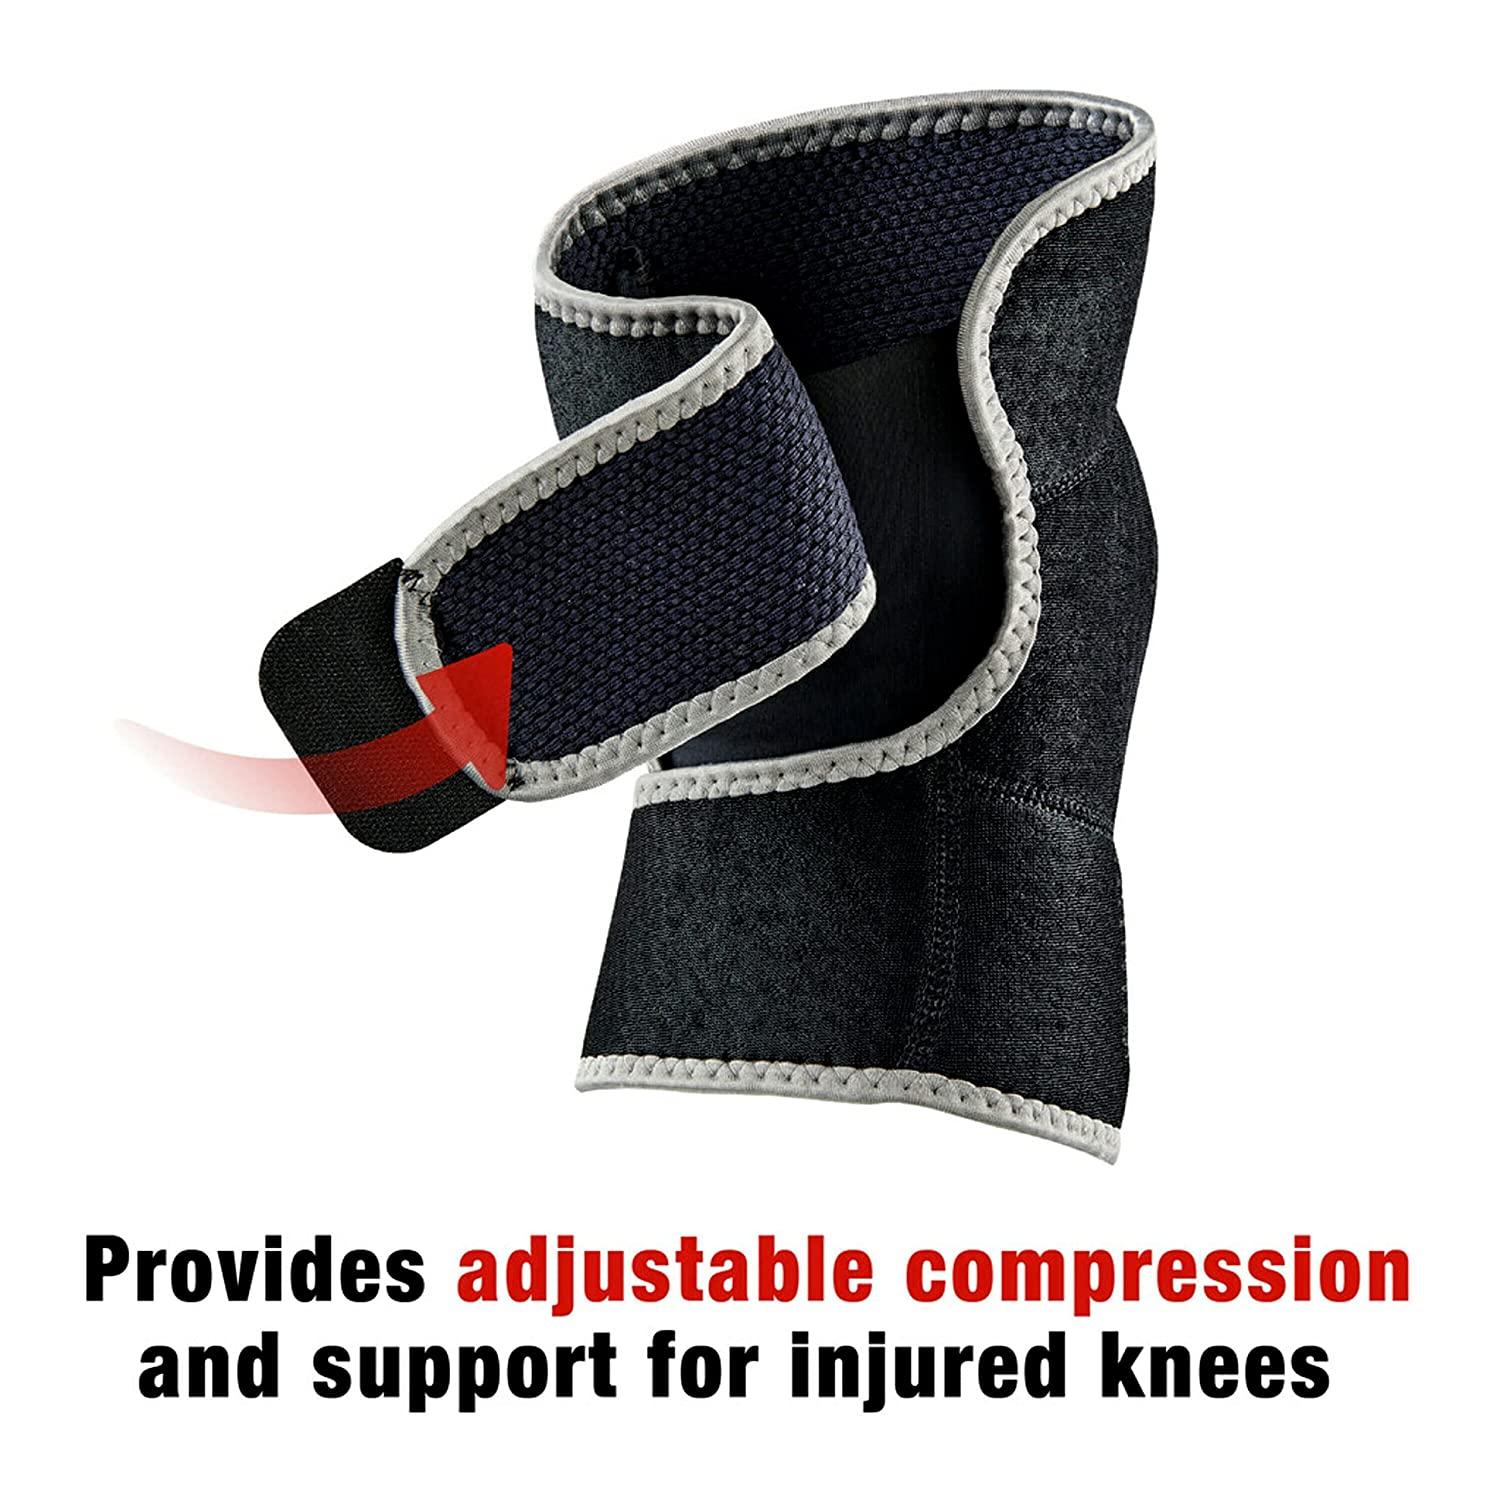 ACE Brand Adjustable Compression Wrist Support, India